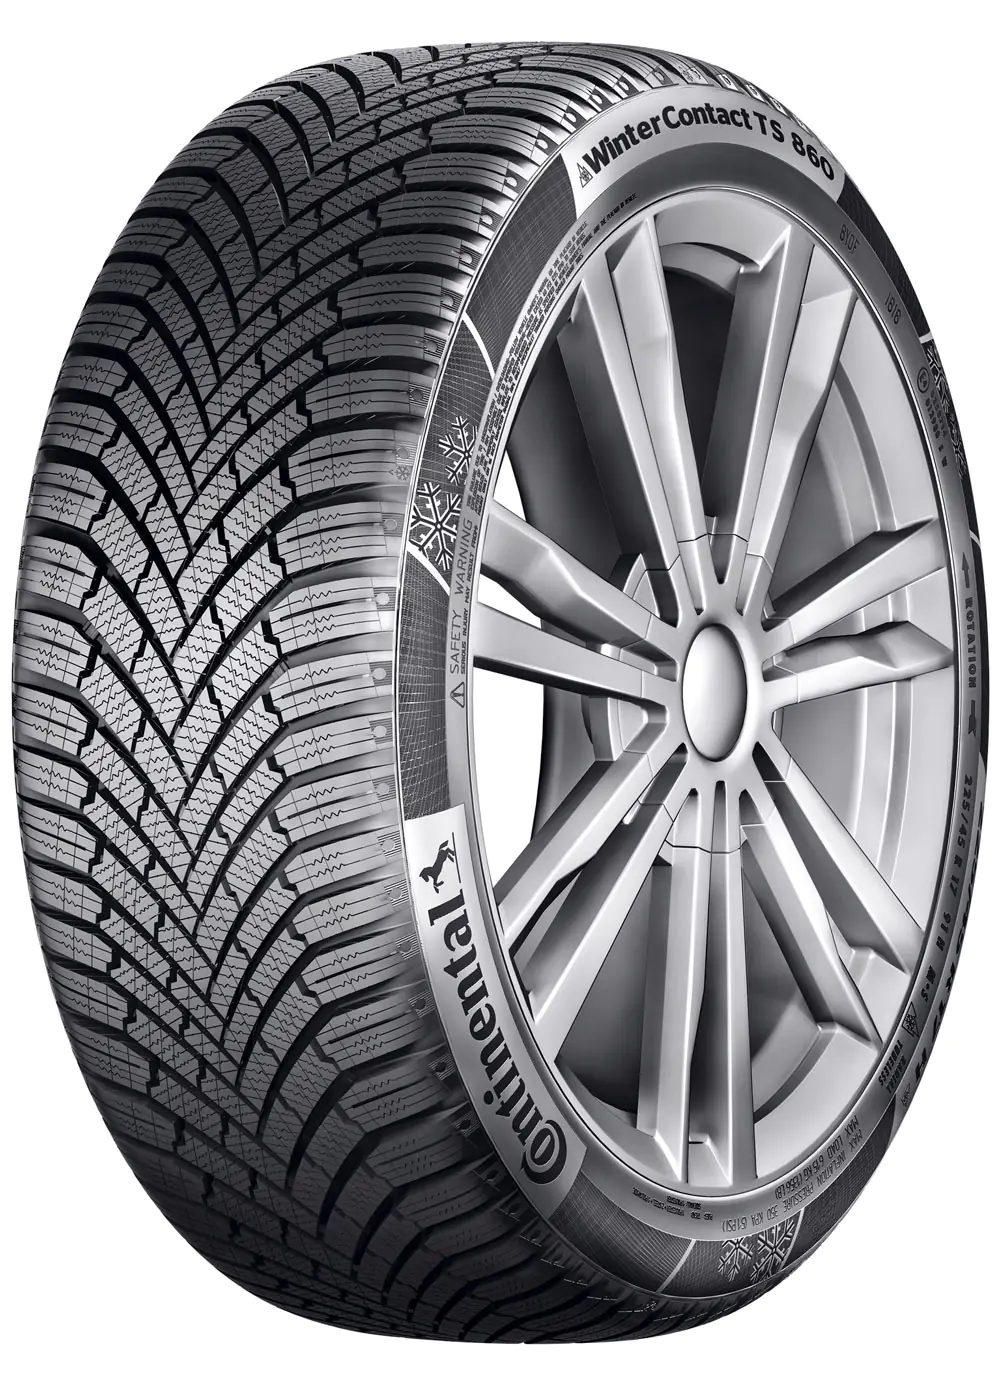 Gomme Autovettura Continental 245/50 R19 105V WINTERCONTACT TS 870 P XL M+S Invernale